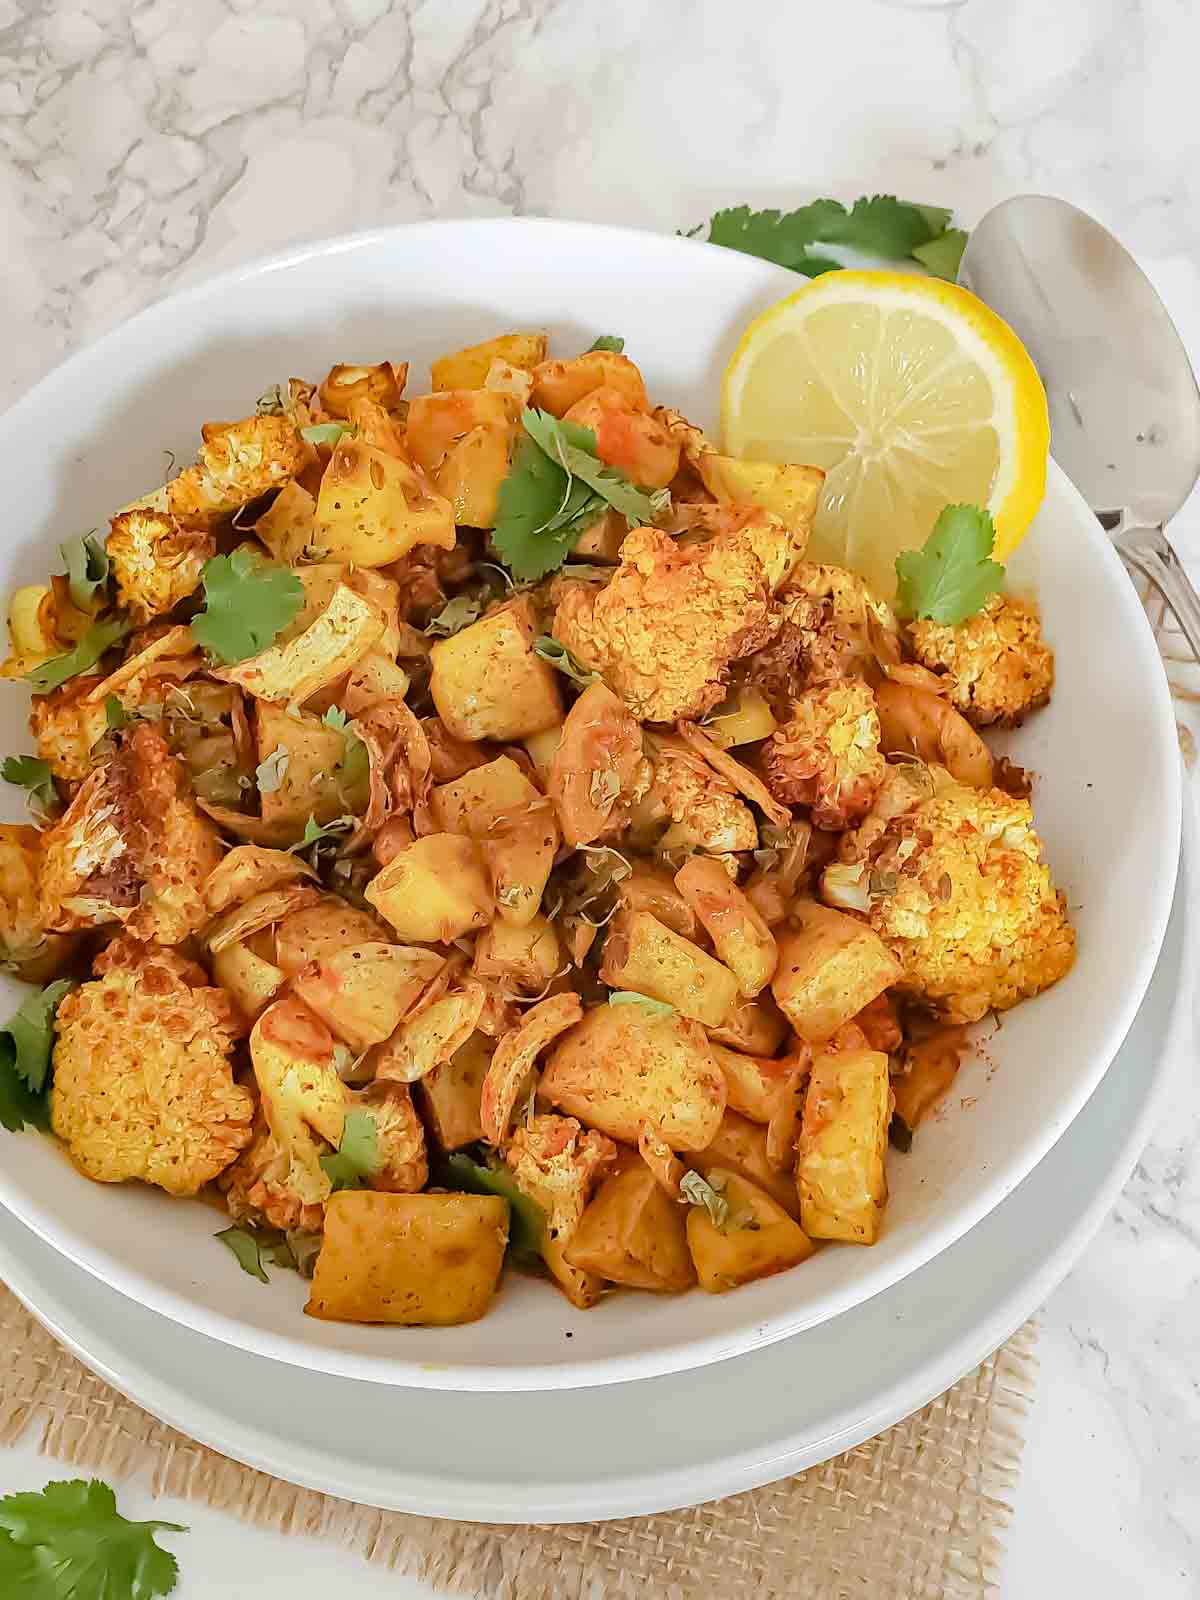 A bowl full of aloo gobi curry which is Indian cauliflower and potato dry sabji or stir fry with flavorful spices.